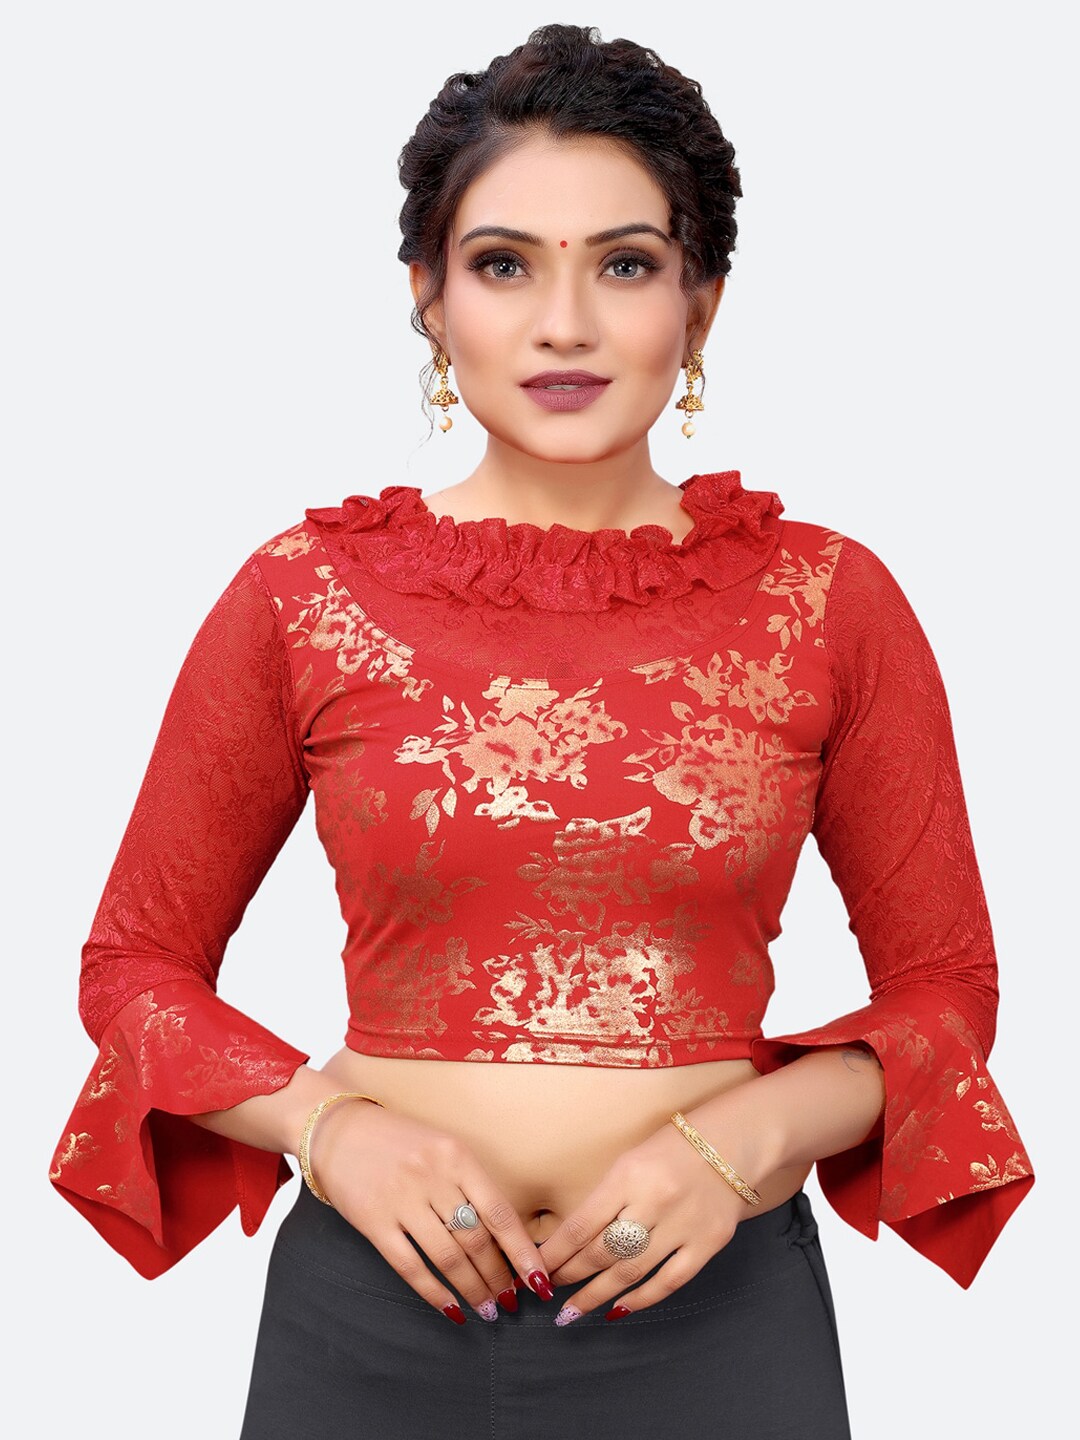 SIRIL Women Red & Gold Embellished Saree Blouse Price in India